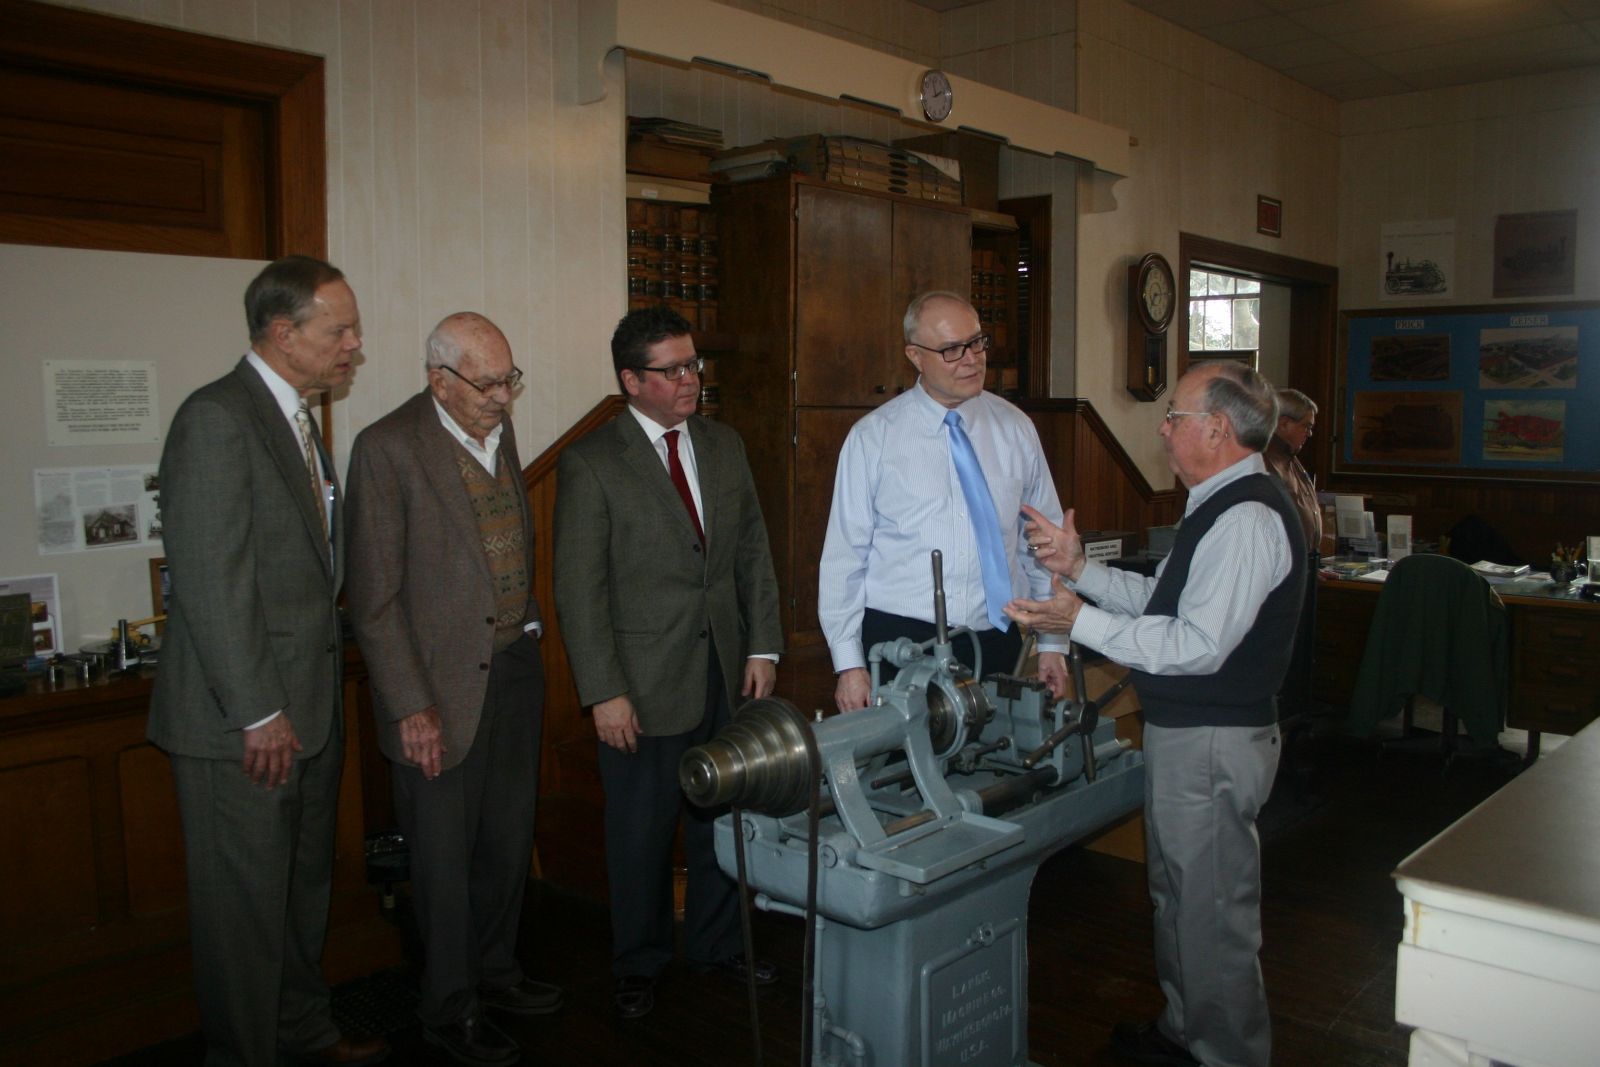 Franklin County Commissioners tour Waynesboro Industrial Museum, guided by George Buckey and Brian Shook.